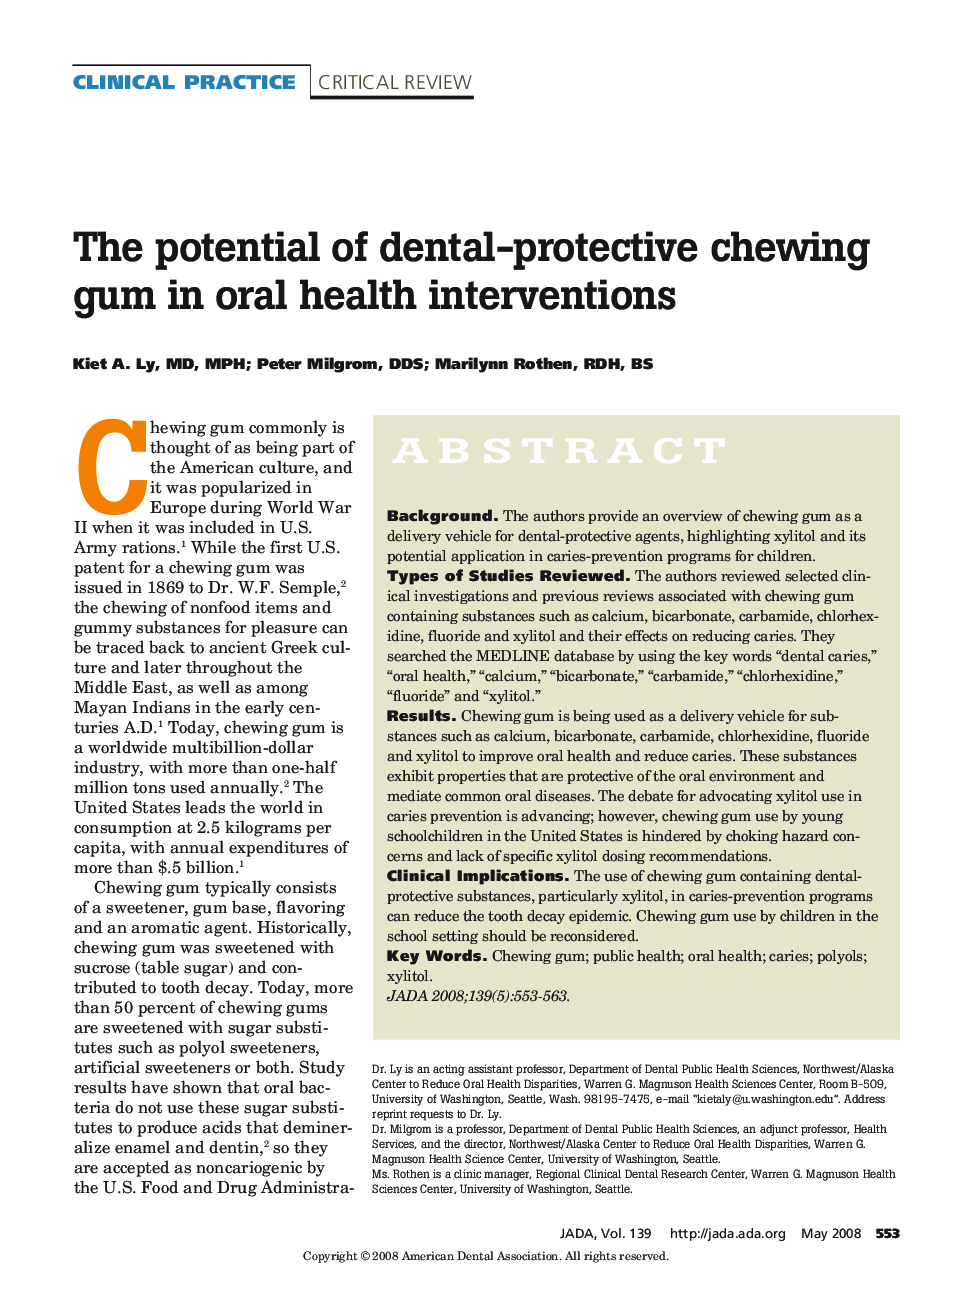 The Potential of Dental-Protective Chewing Gum in Oral Health Interventions